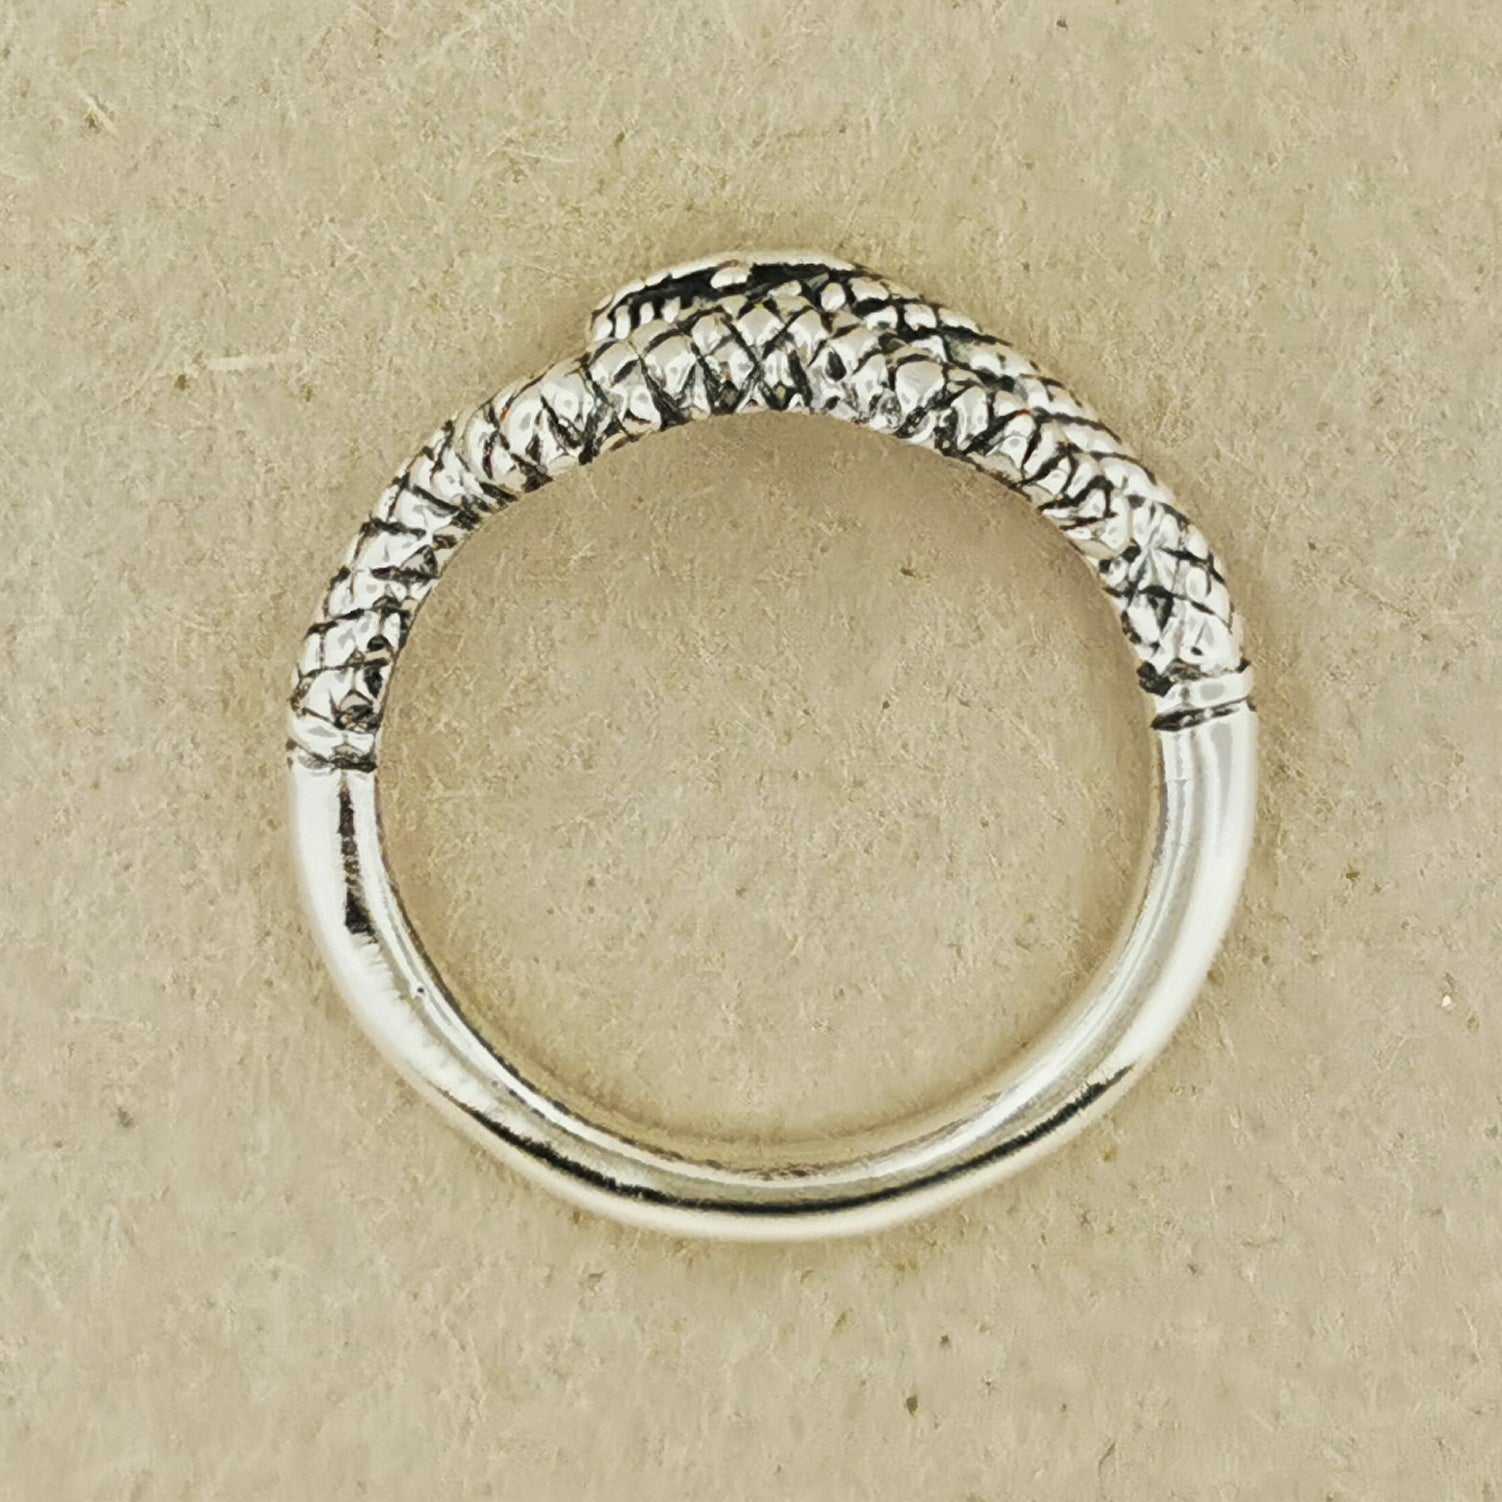 Adjustable Coiled Snake Ring in 925 Silver or Bronze, Snake Ring Jewellery, Reptile Rings, Delicate Snake Rings, Egyptian Snake Ring Jewelry, Silver Snake Ring, Adjustable Snake Ring, Silver Serpent Ring, Silver Snake Jewellery, Coiled Serpent Ring